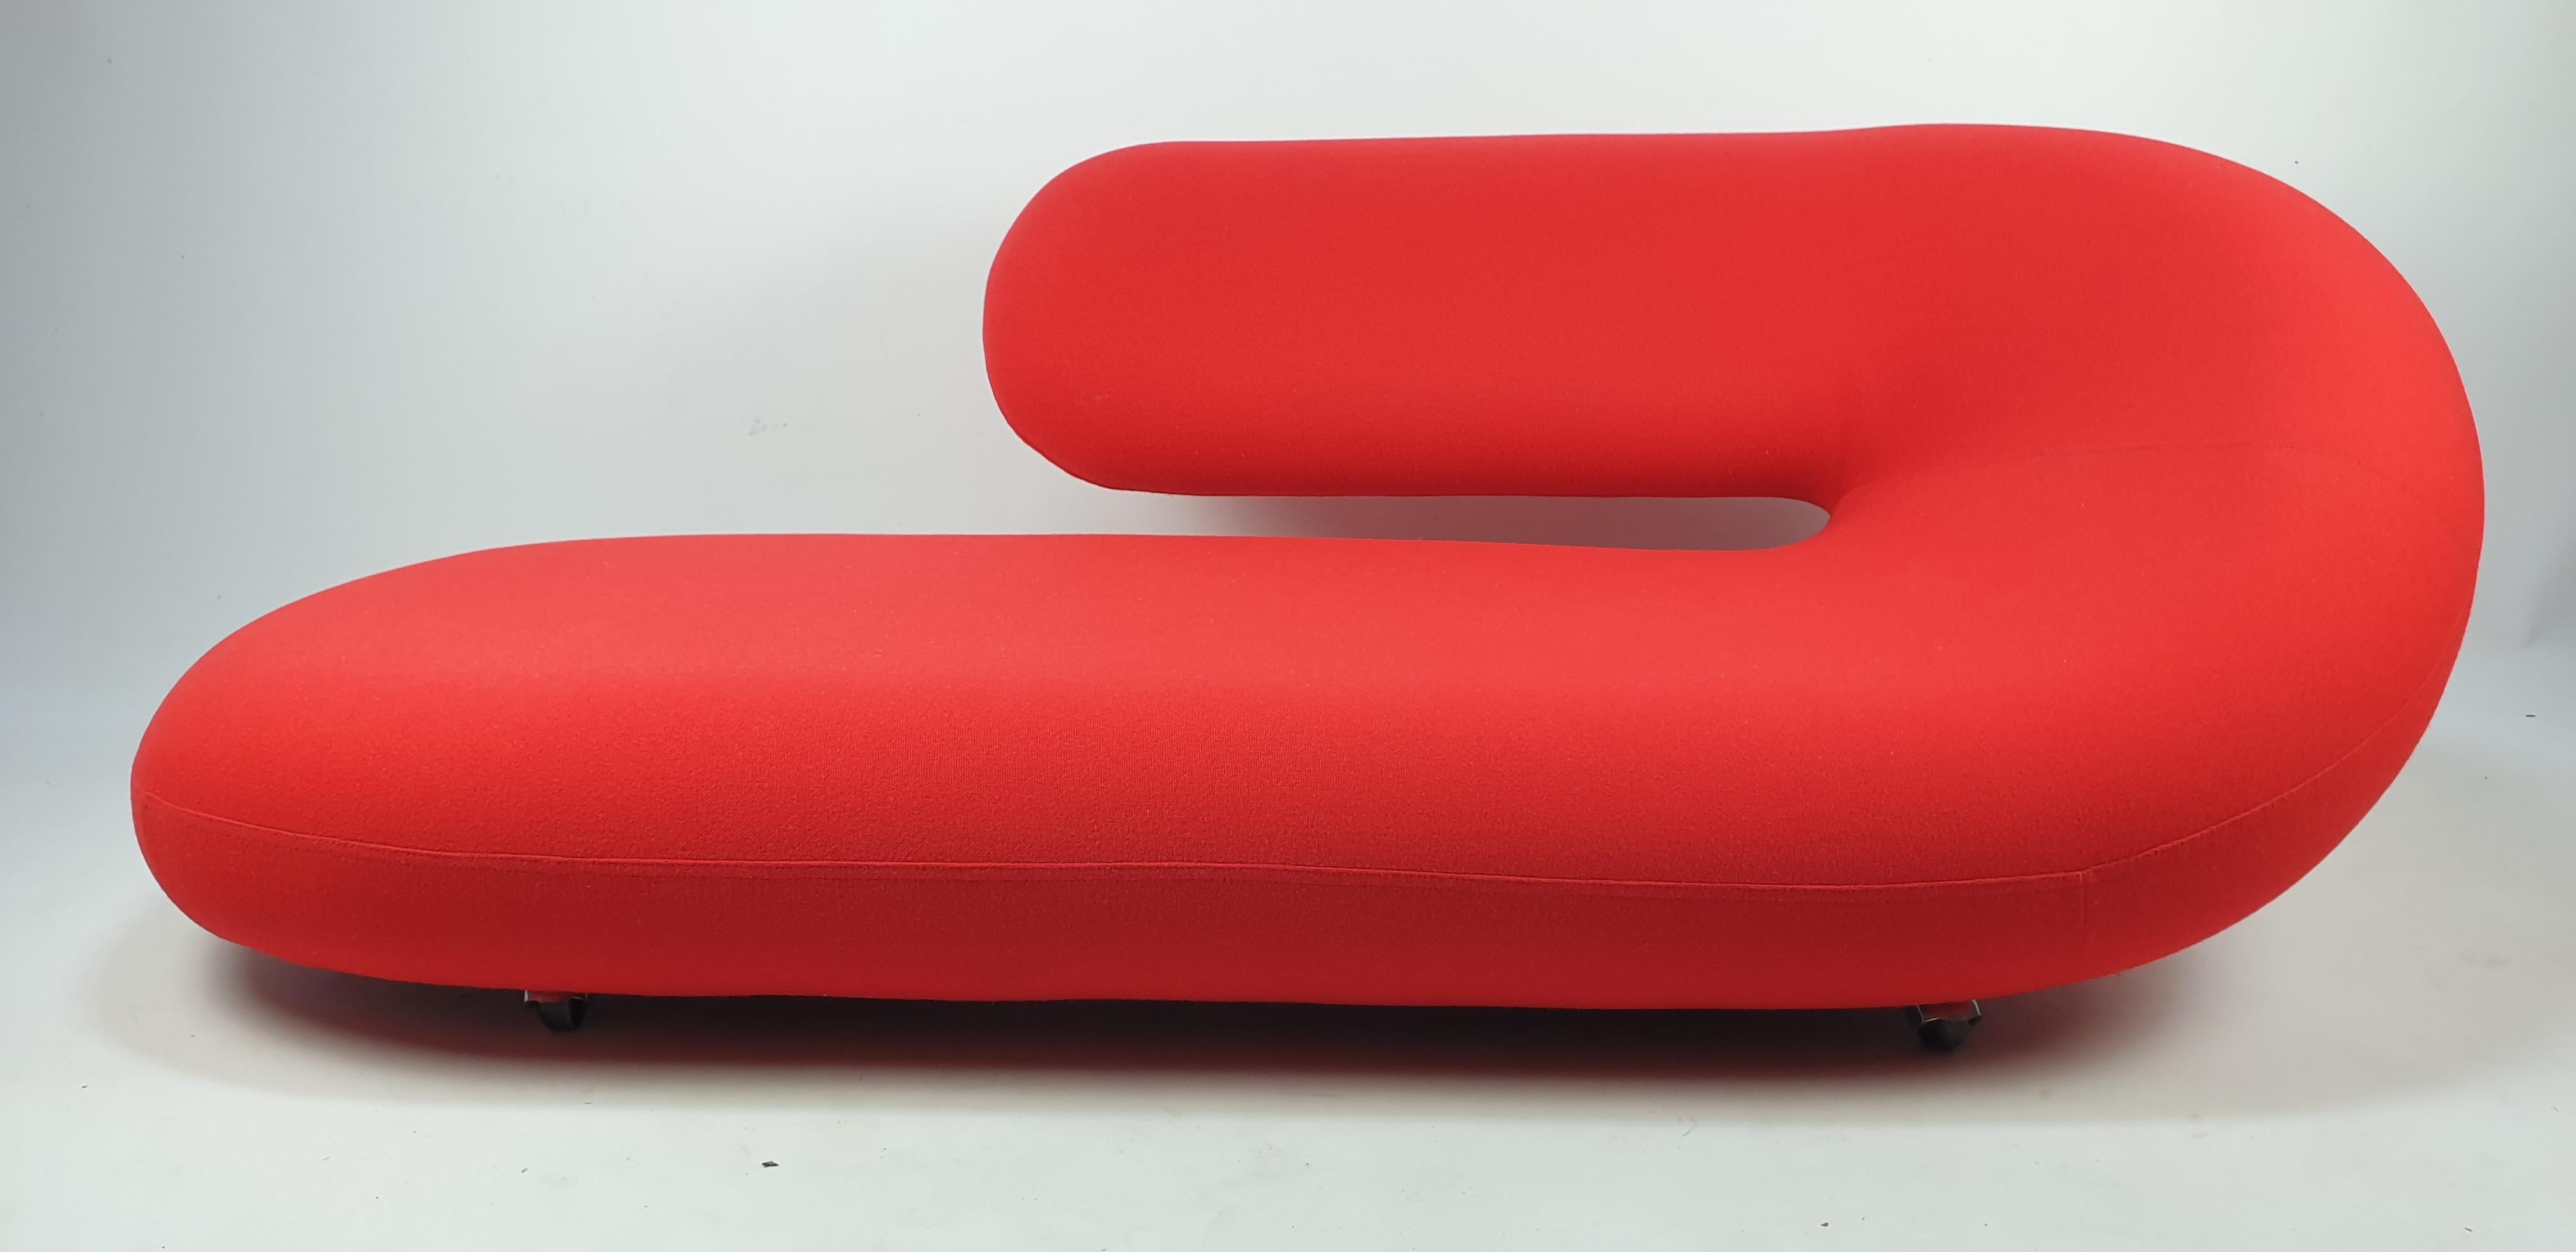 This model Cleopatra chaise longue was manufactured by Artifort in the 1970s and designed by Geoffrey Harcourt. It has the original high-quality Kvadrat wool fabric and it is in very good condition. Very comfortable and elegant. It is a piece of art